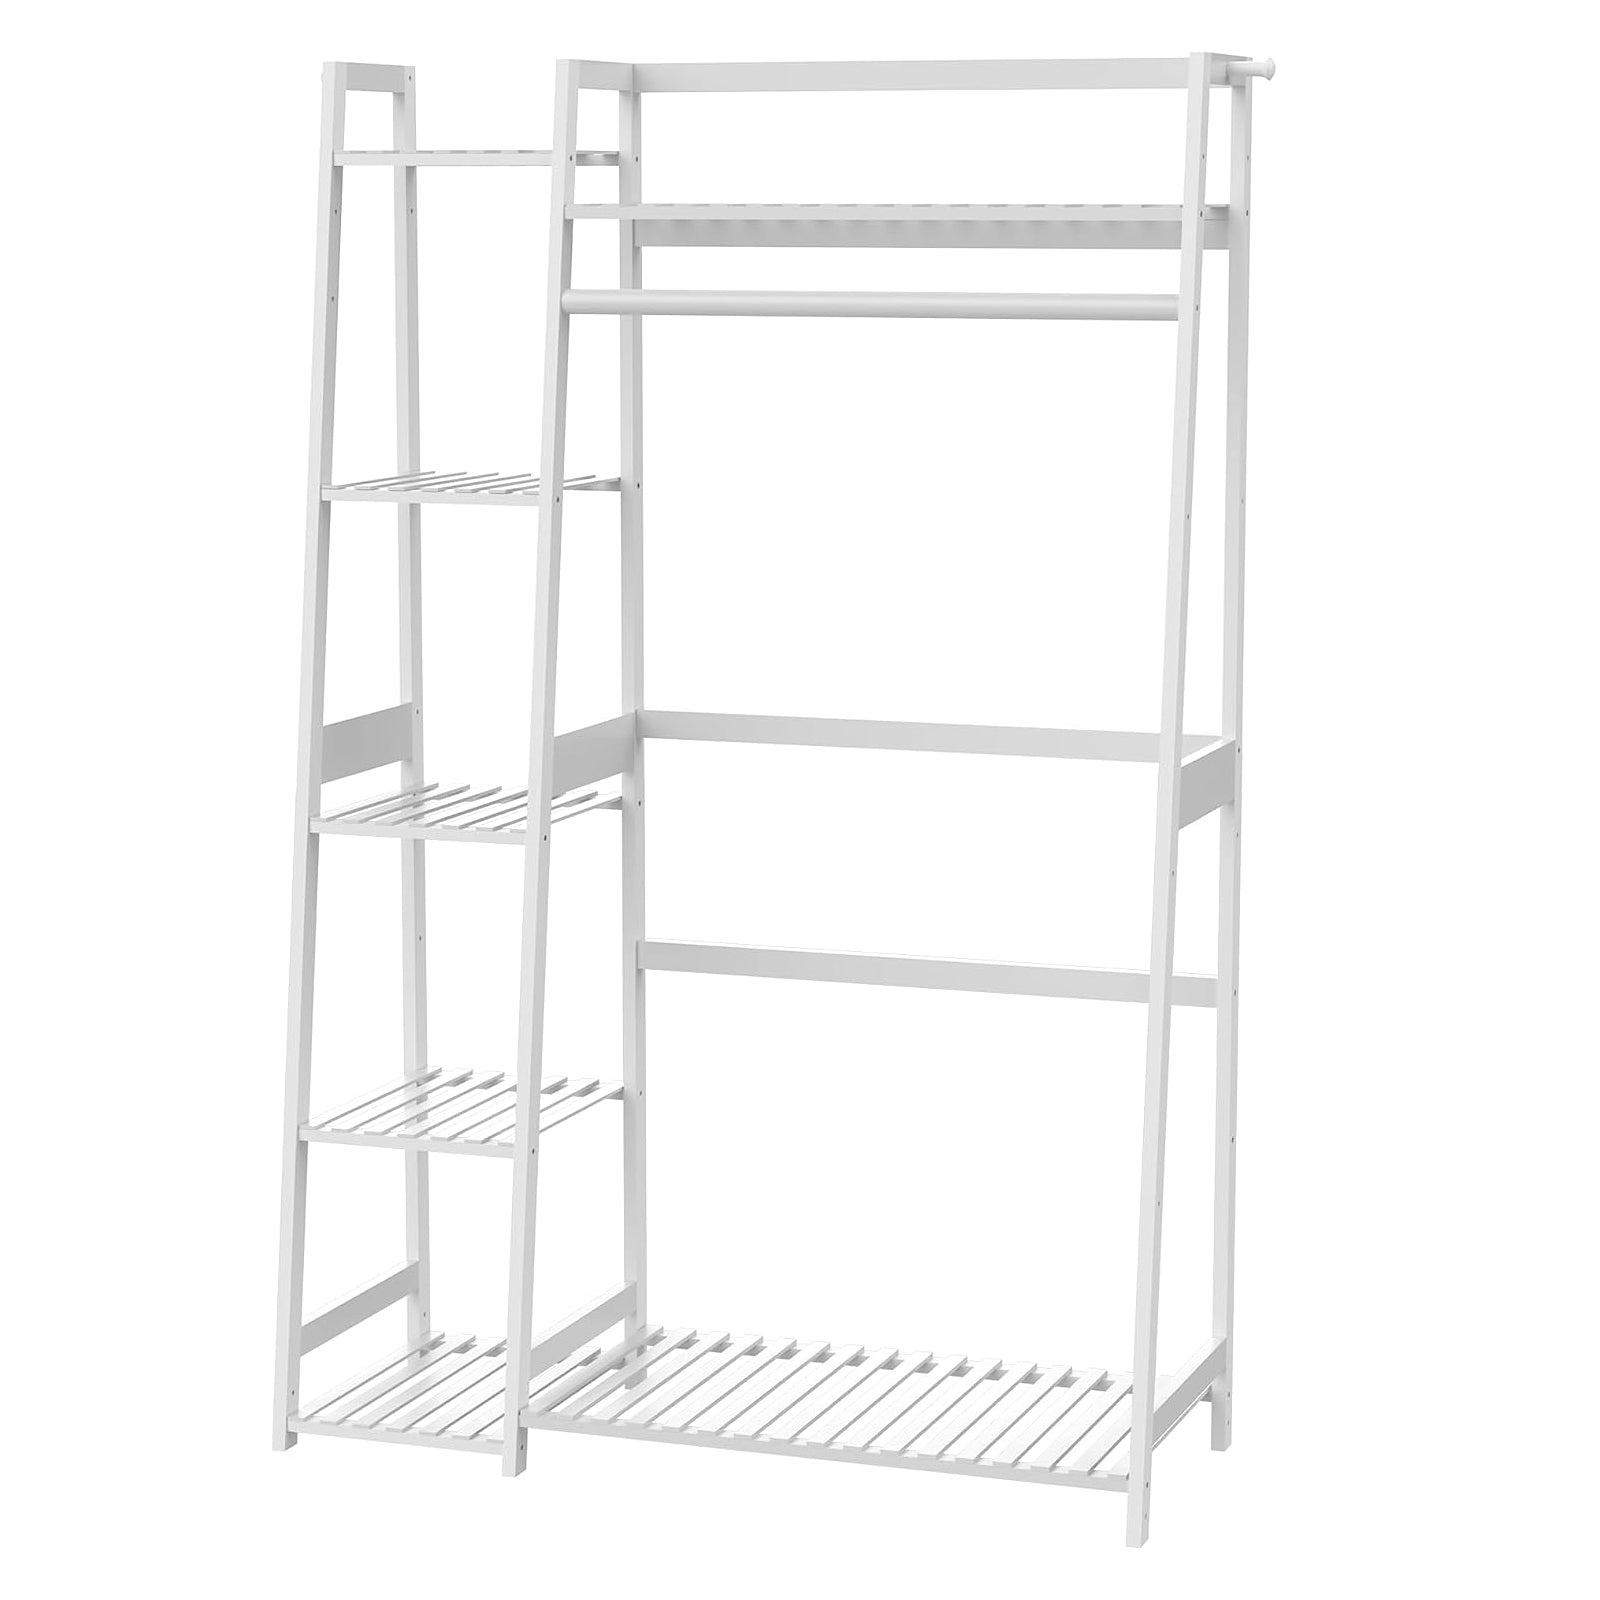 Amboo Garment Rack with Shelves, Clothing Rack for Hanging Clothes, Freestanding Closet Organizer, white